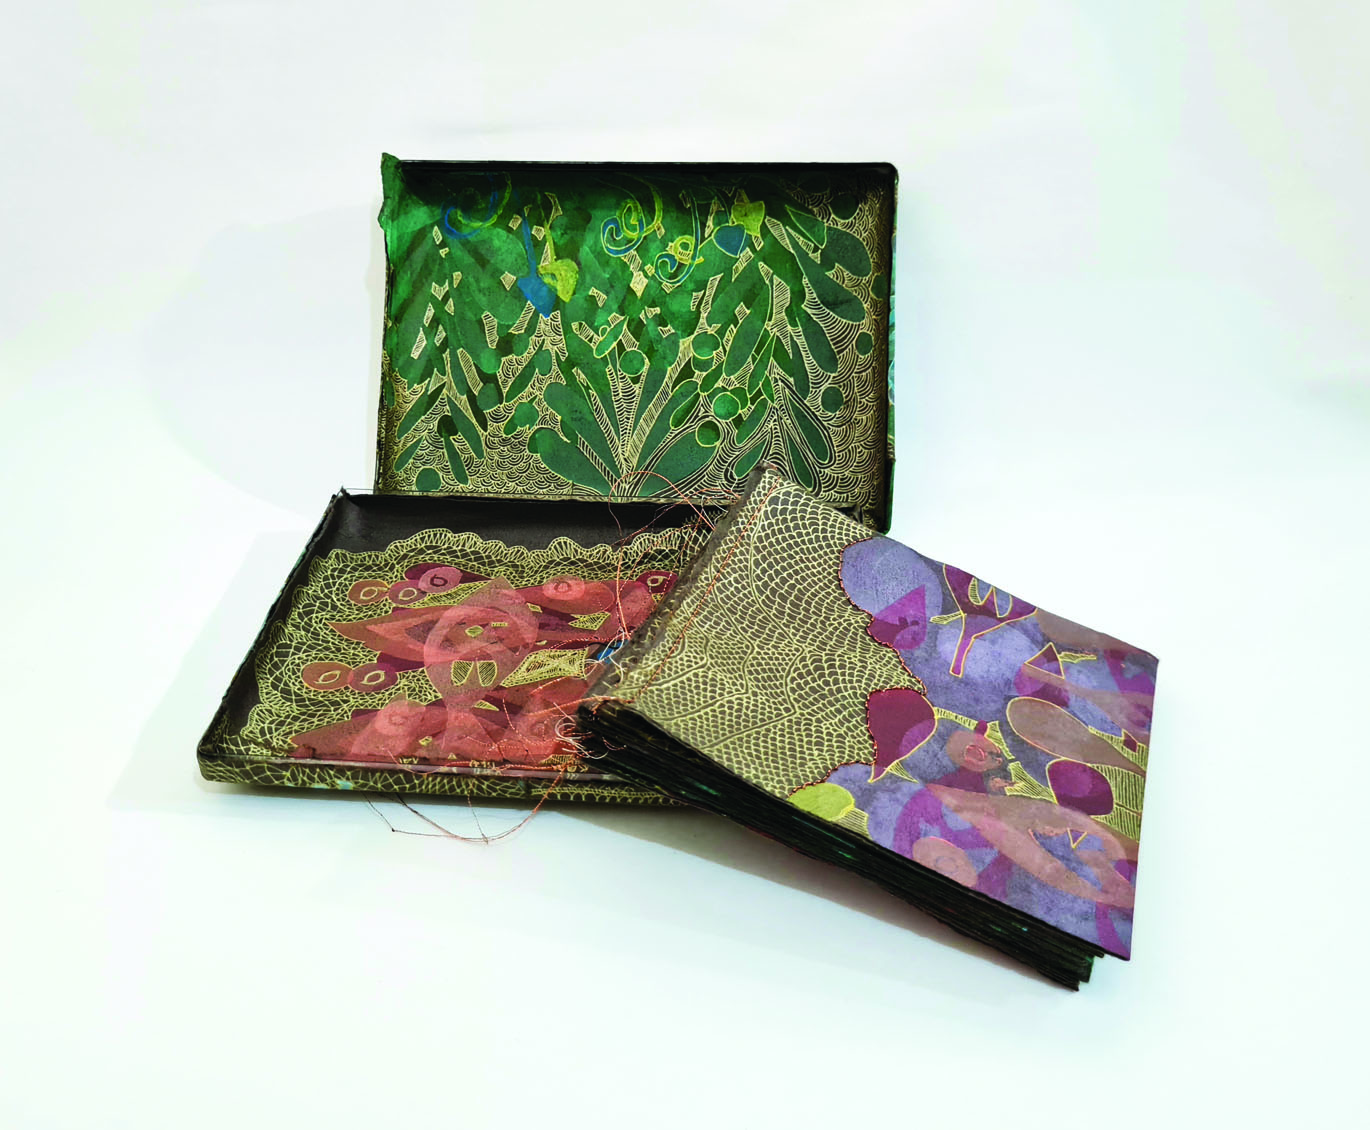 Series of woodblock prints with metallic stitching housed in a container covered in coloured woodblock prints